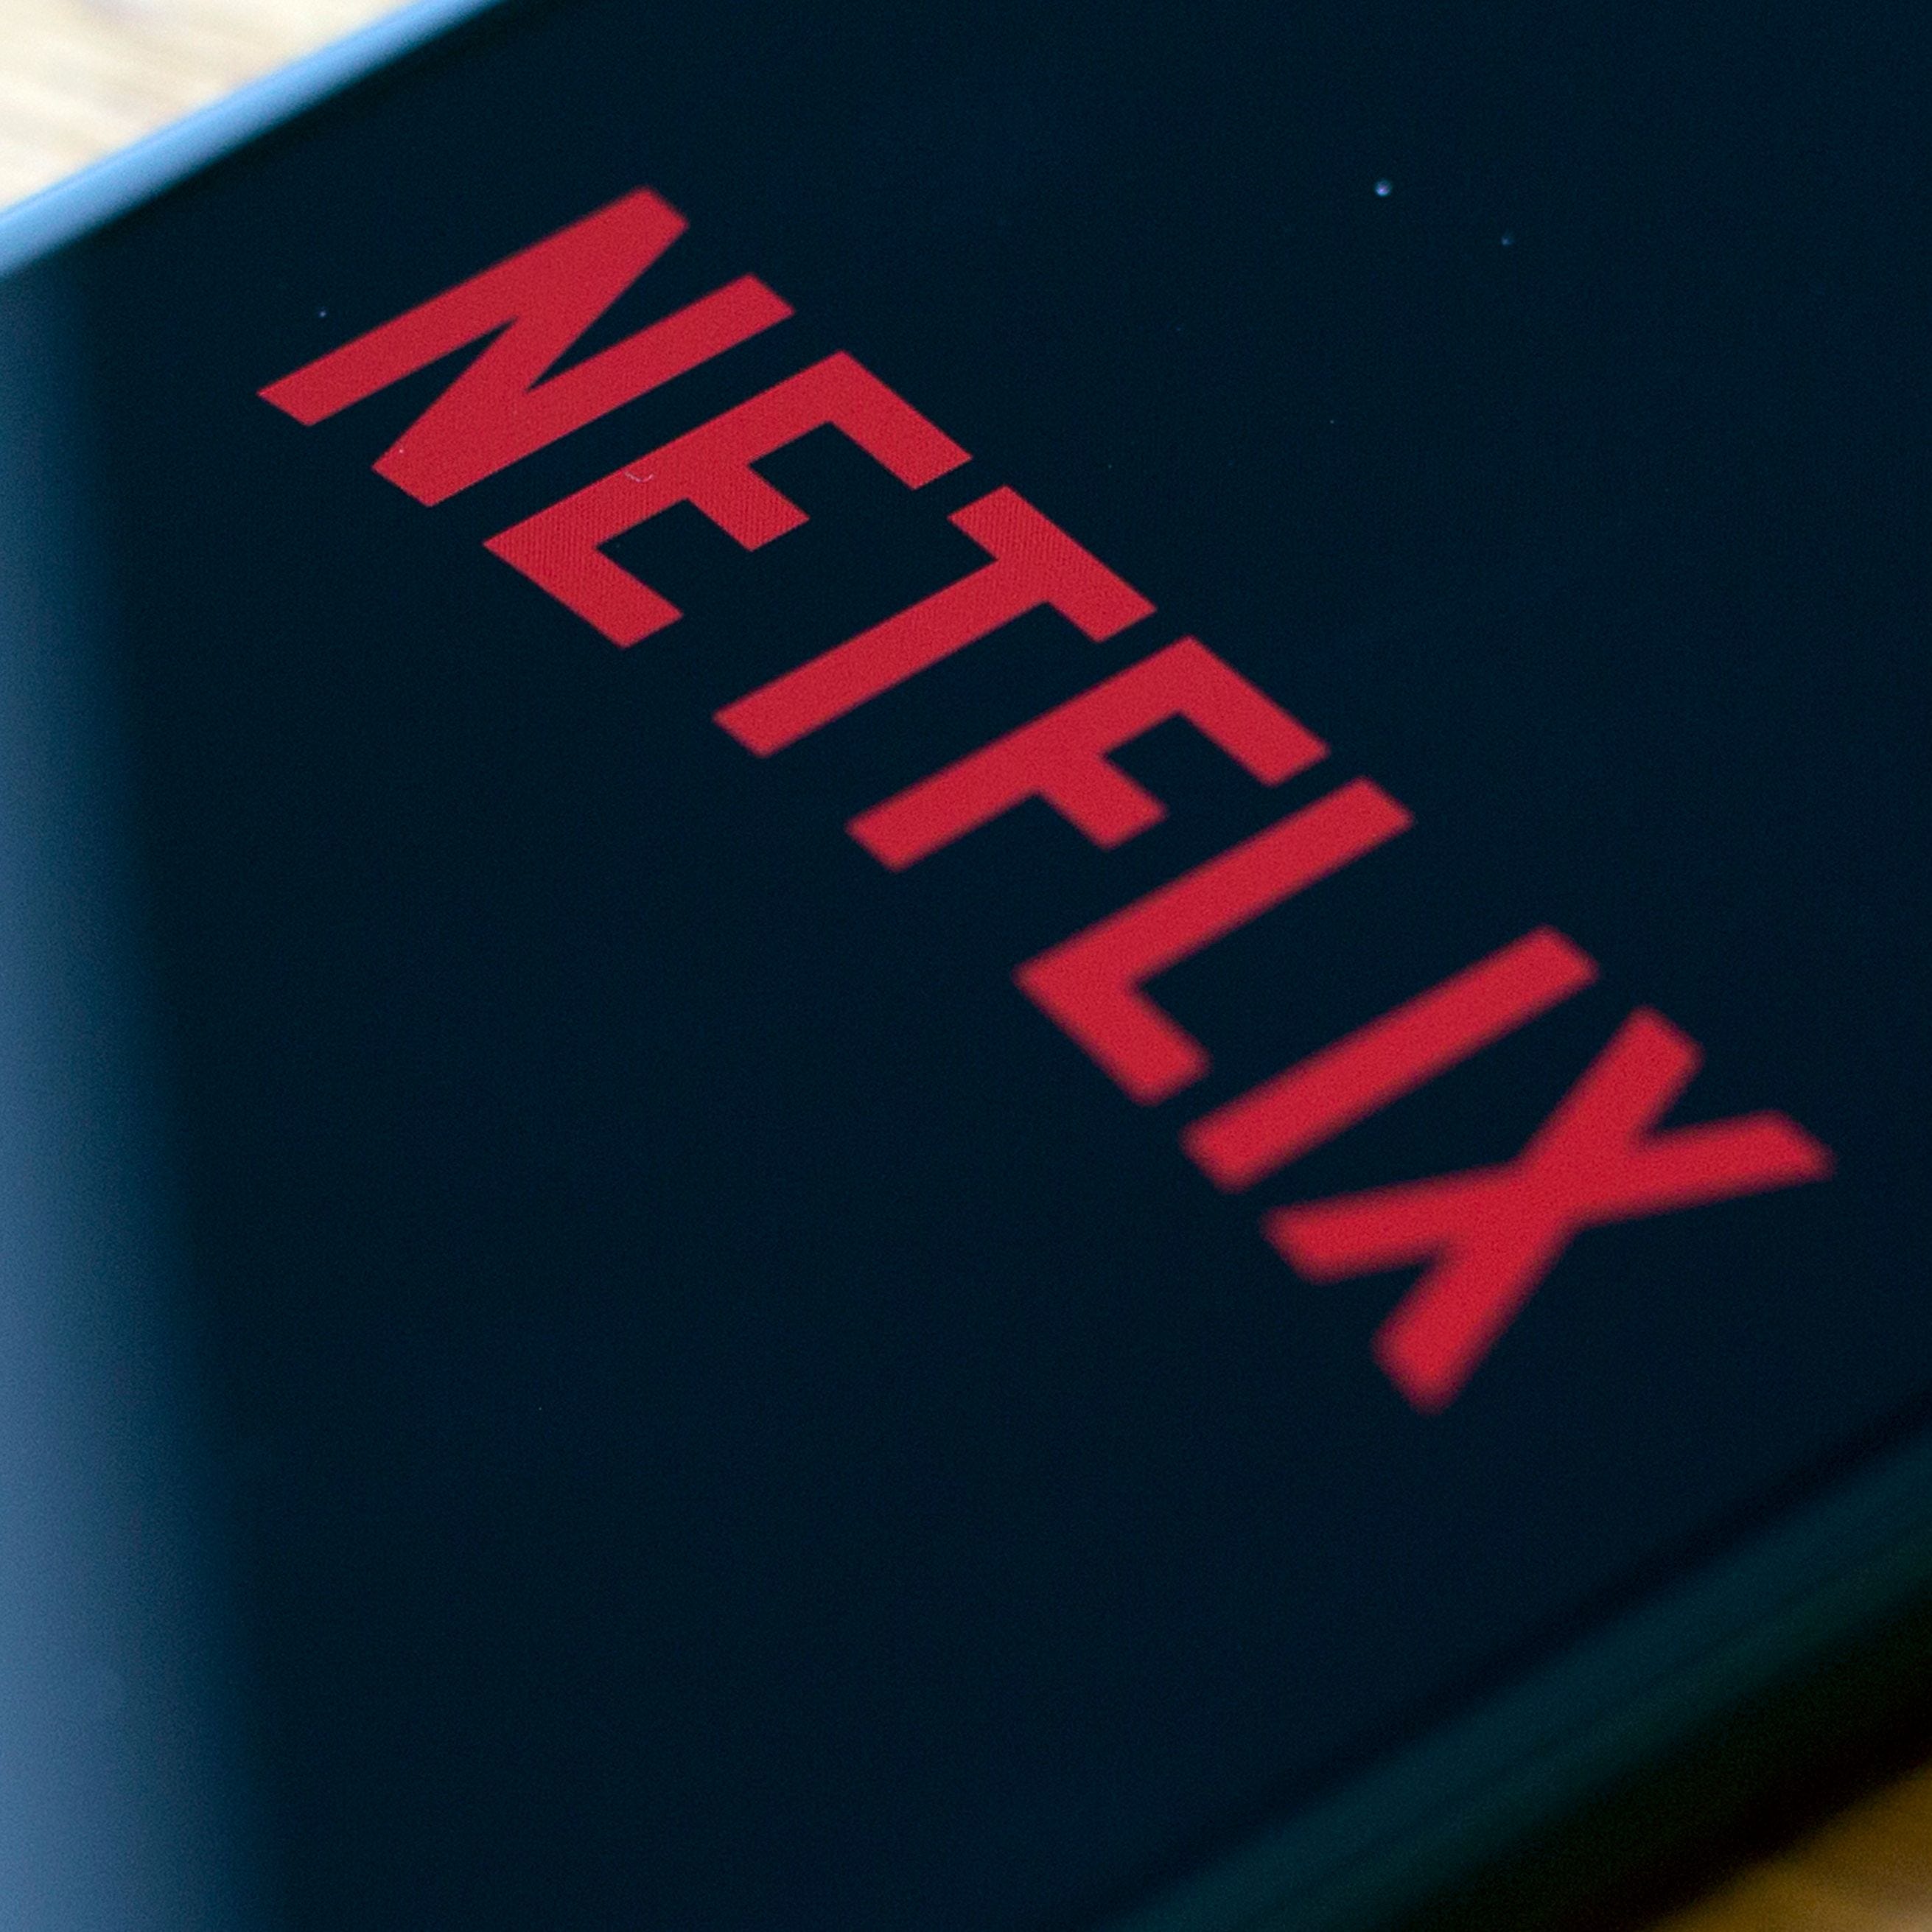 In this file illustration photo taken on July 10, 2019 the Netflix logo is seen on a phone in Washington, DC.